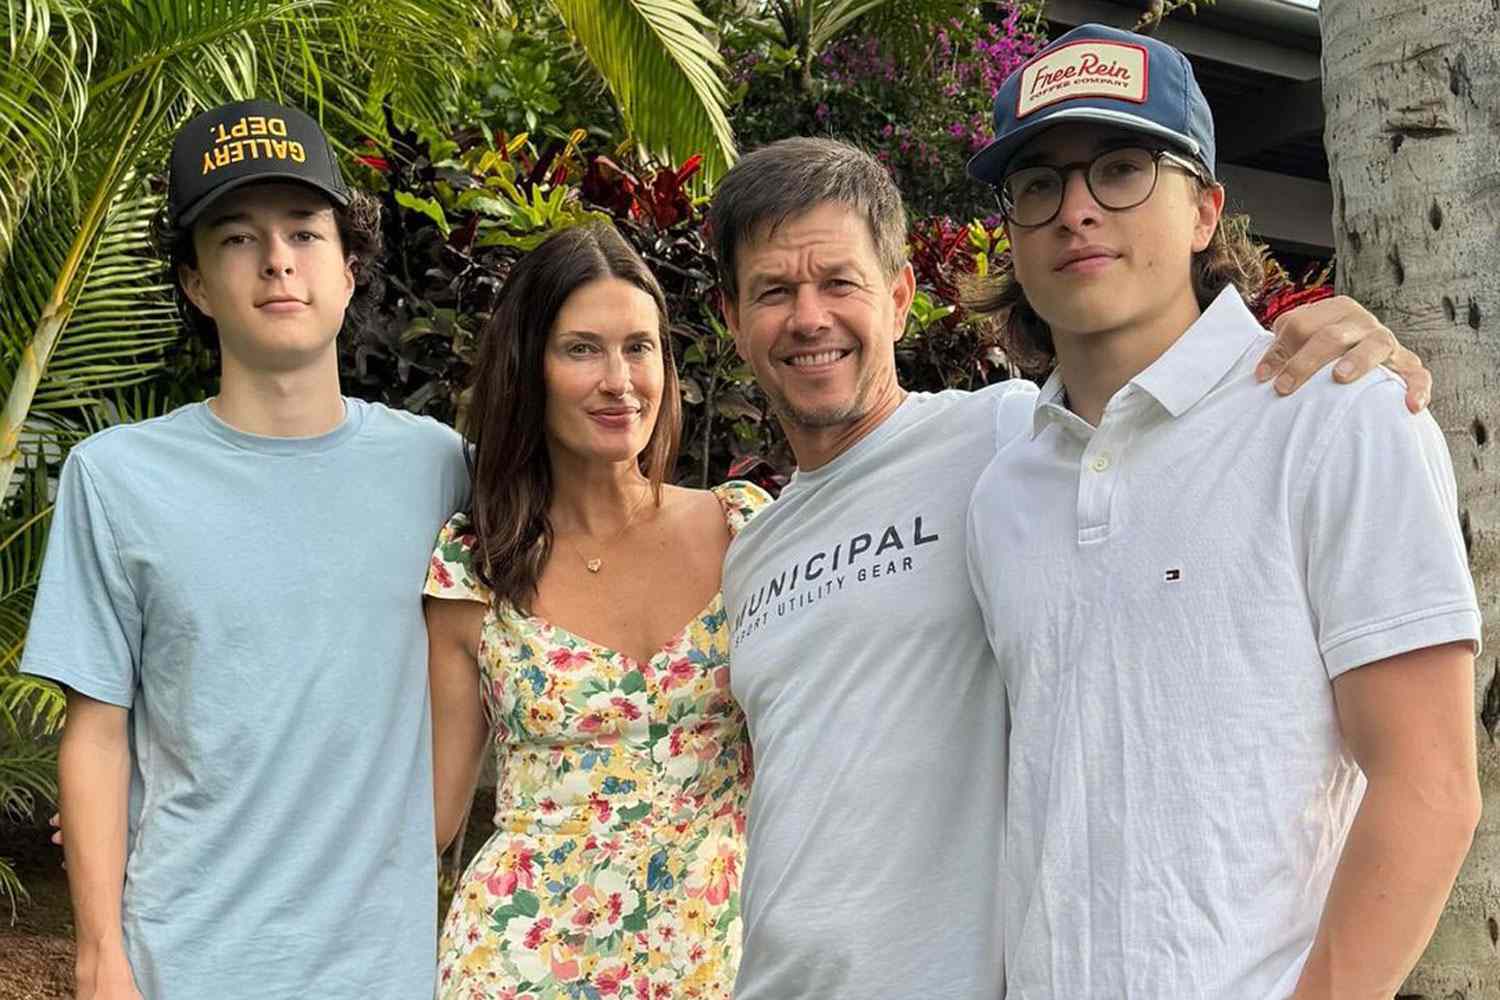 Mark Wahlberg and Rhea Durham's Sons Stand Taller Than Their Parents in New Family Vacation Photo: 'My Boys'